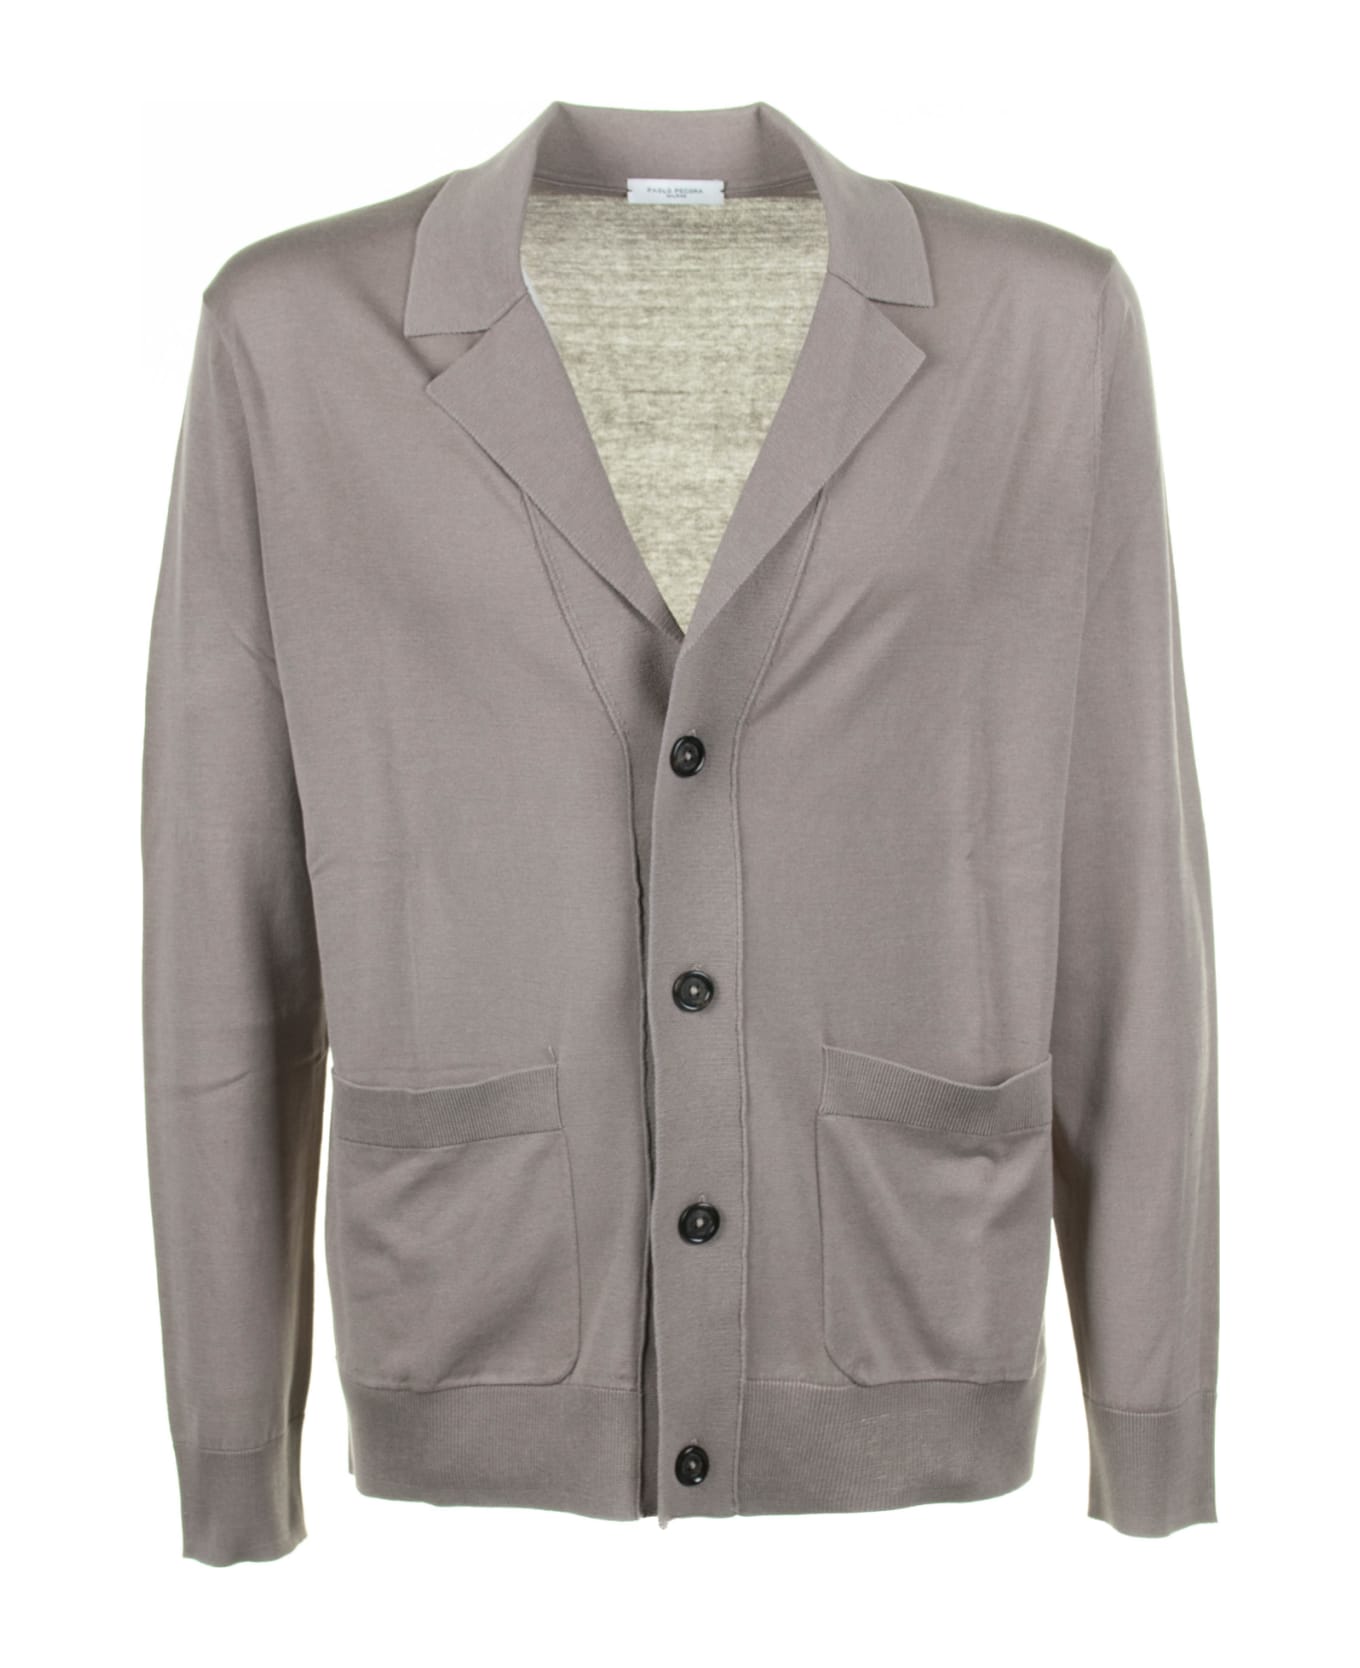 Paolo Pecora Dove Gray Cardigan With Pockets And Buttons - TORTORA カーディガン